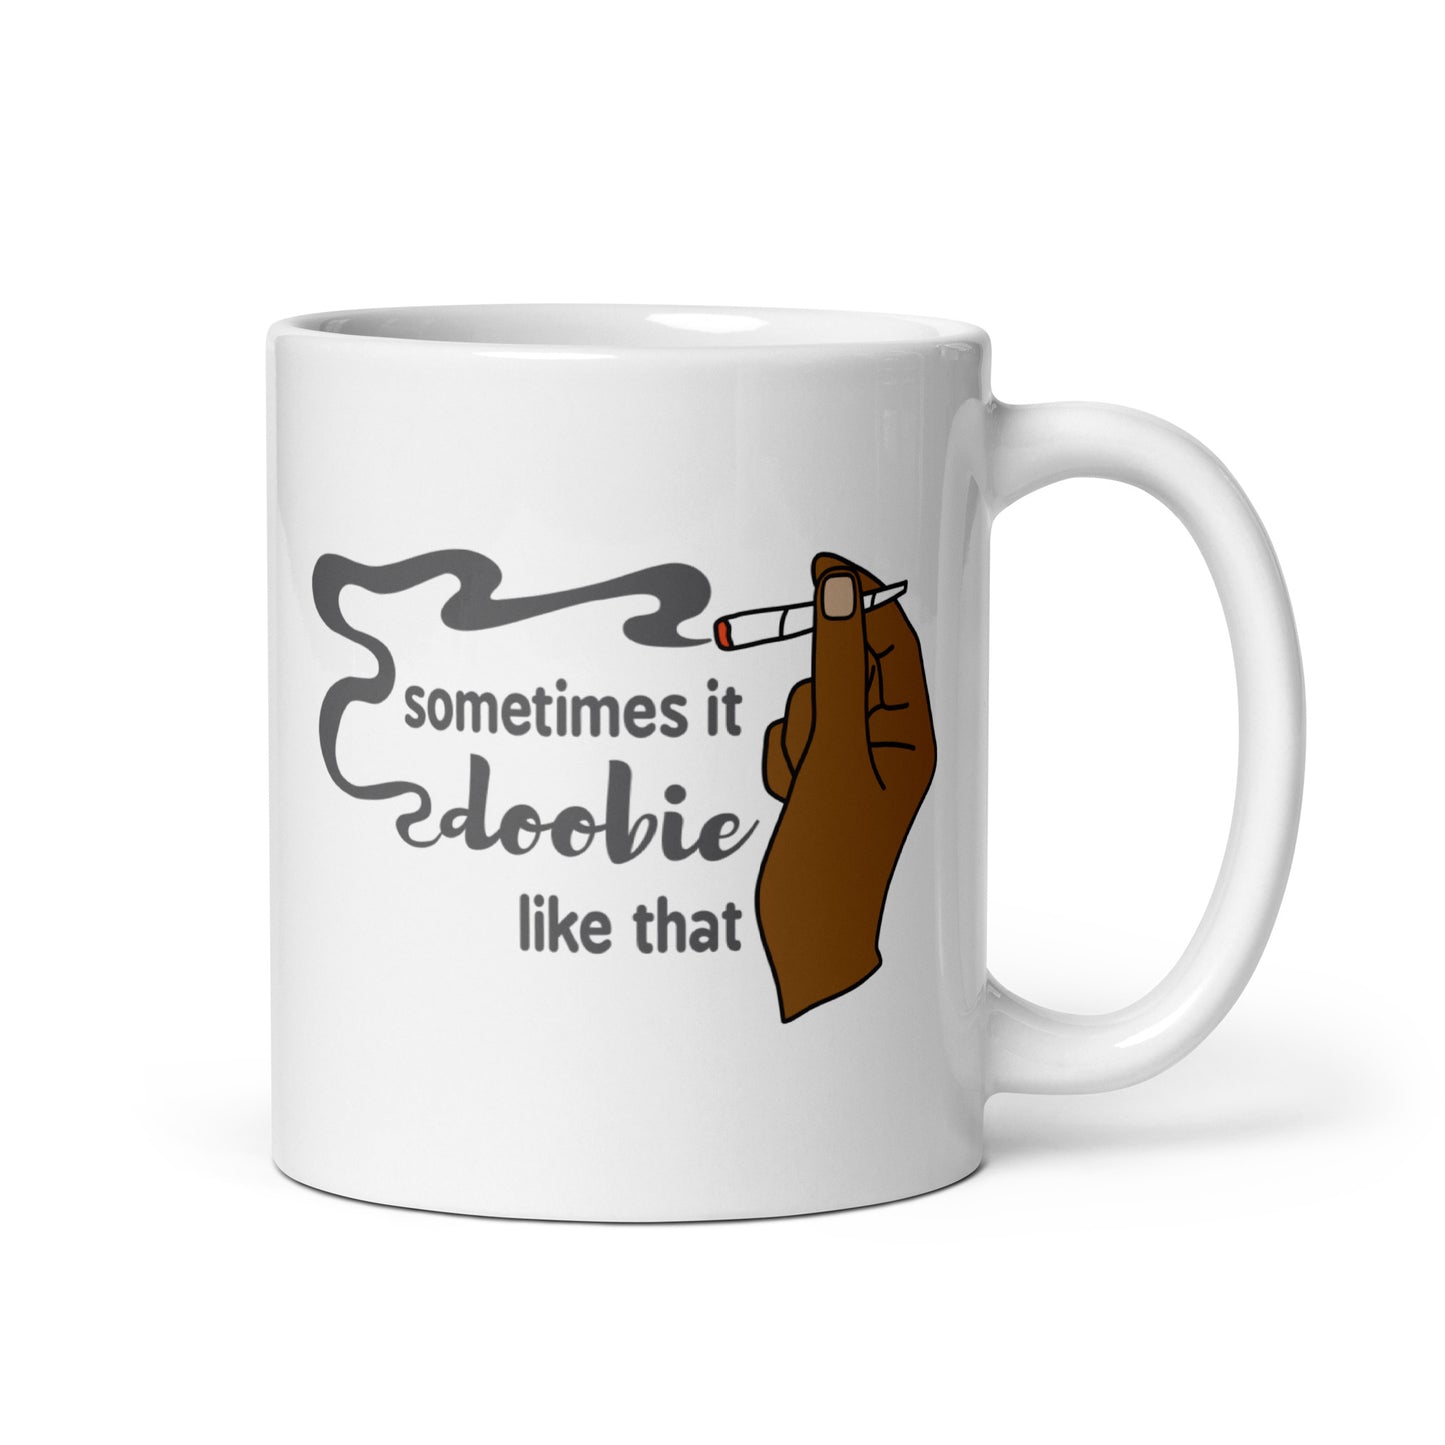 A white 11 ounce ceramic coffee cup featuring an illustration of a hand with deep brown skin holding a joint. Text alongside the hand reads "sometimes it doobie like that" with the word "doobie" made from smoke from the joint.